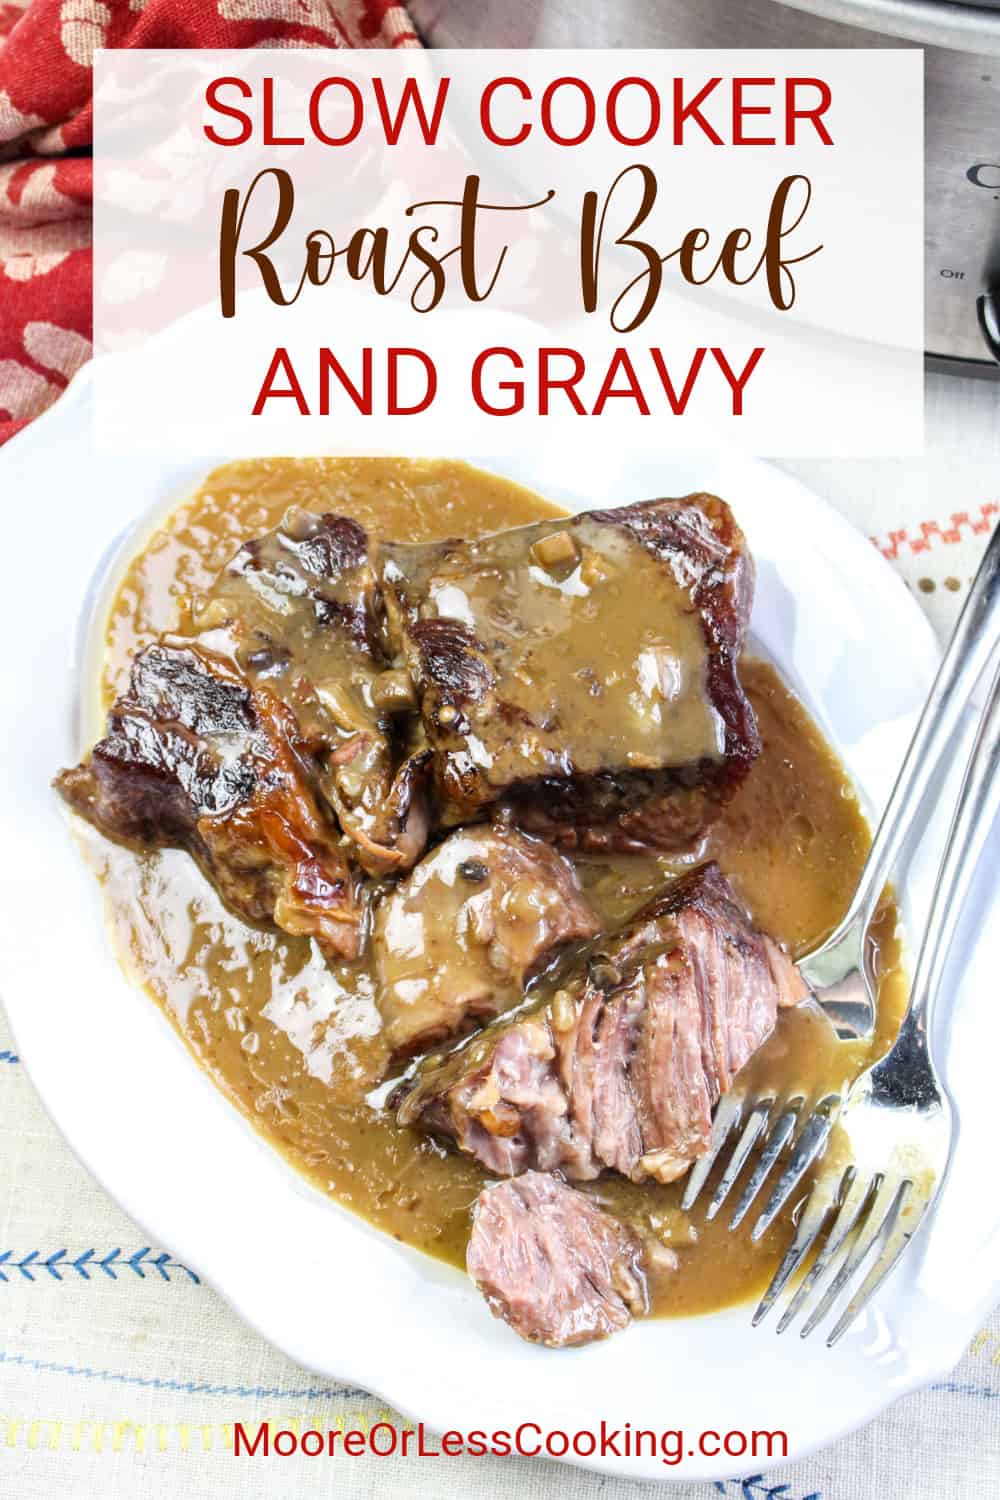 This slow-cooker roast beef and gravy recipe is a classic comfort food meal that's fall-off-the-fork tender, flavorful, and most of all, easy! It's a set-it-and-forget-it meal that's guaranteed to be a family favorite. via @Mooreorlesscook